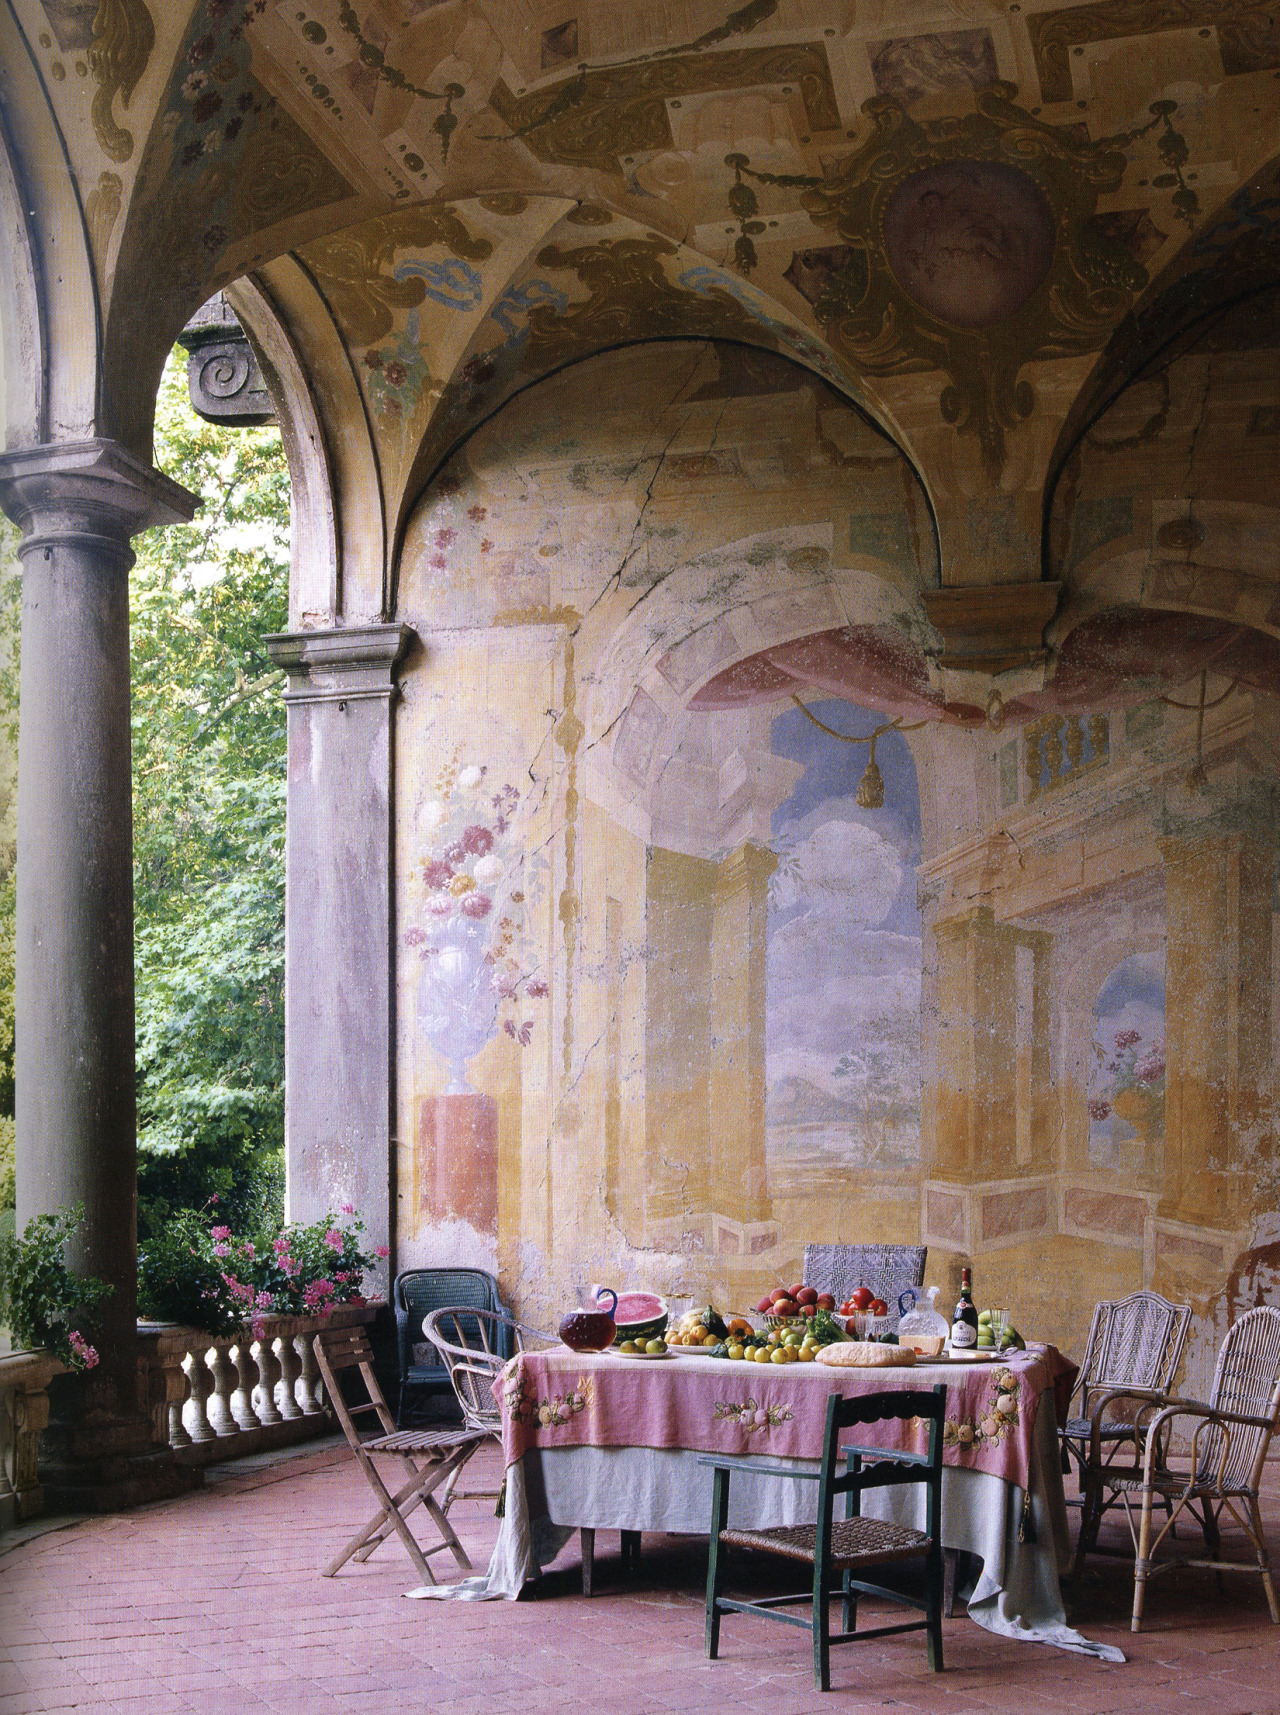 Villa Torrigiann, Lucca Italy, fresco, late 17th century
Walls by Florence de Dampierre with photographs by Tim Street-Porter and Pierre Estersohn (Rizzoli Books).  (via The Curated Object)